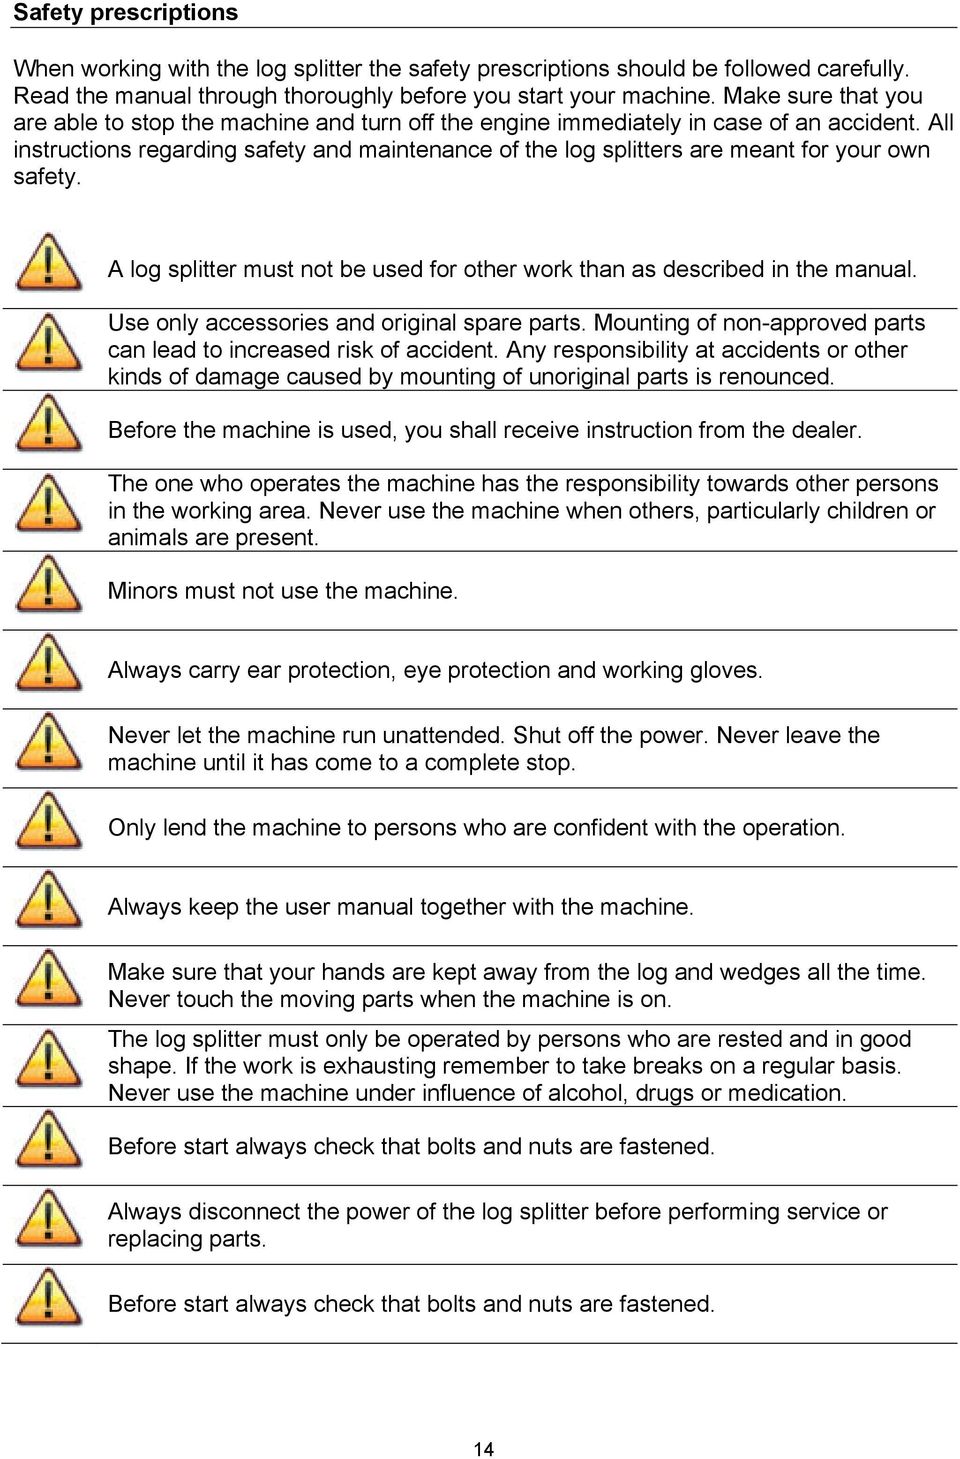 All instructions regarding safety and maintenance of the log splitters are meant for your own safety. A log splitter must not be used for other work than as described in the manual.